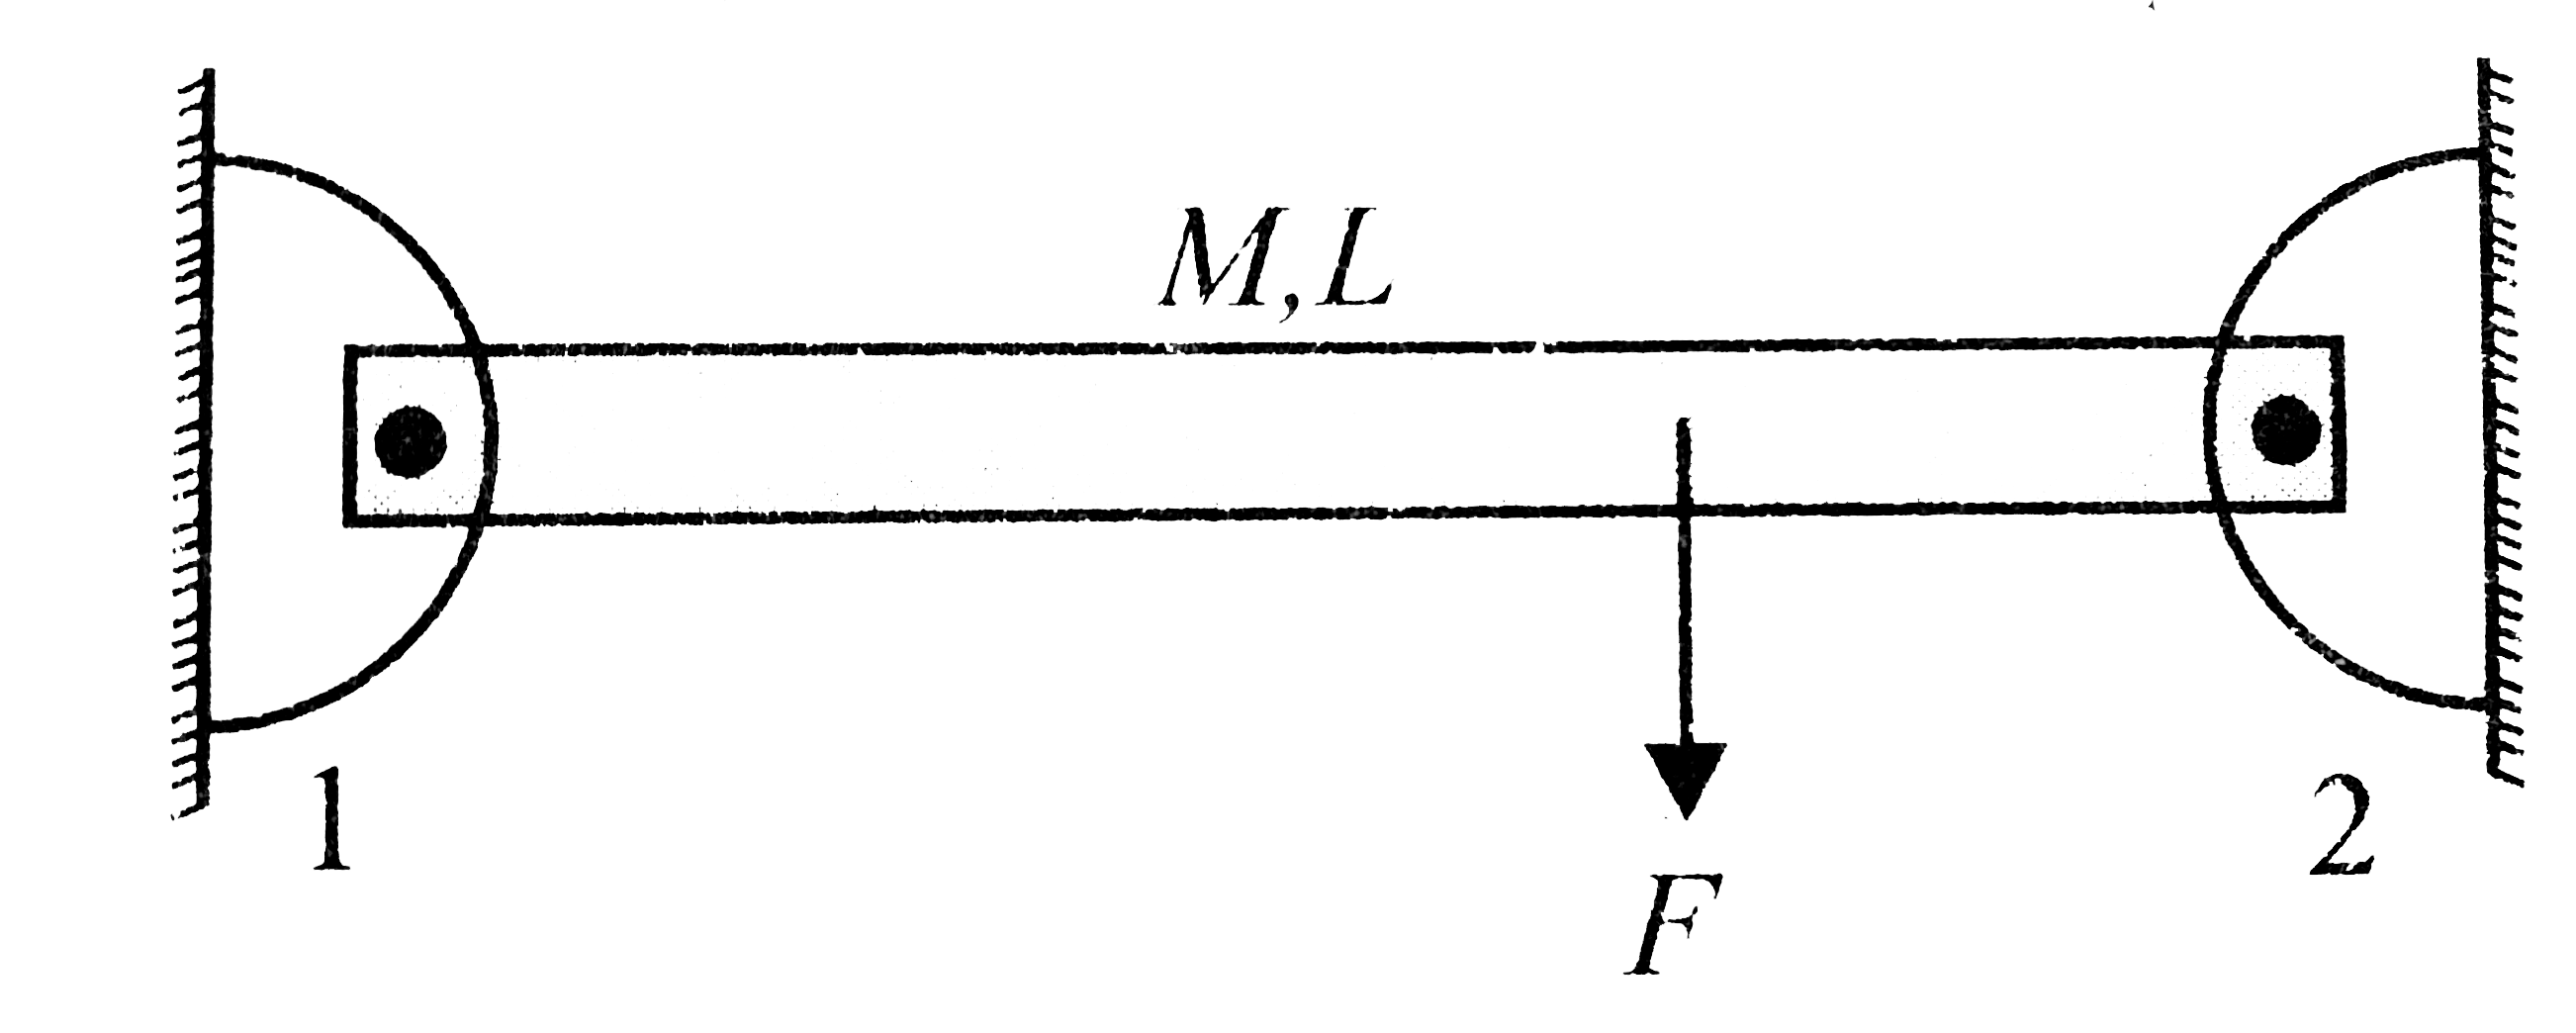 A uniform rod of mass M = 2 kg and length L is suspended by two smooth hinges 1 and 2 as shown in Fig. A force F = 4 N is applied downward at a distance L//4 from hinge 2. Due to the application of force F, hinge 2 breaks. At this instant, applied force F is also removed. The rod starts to rotate downward about hinge 1. (g = 10 m//s^(2))      The reaction at hinge 1, before hinge 2 breaks, is